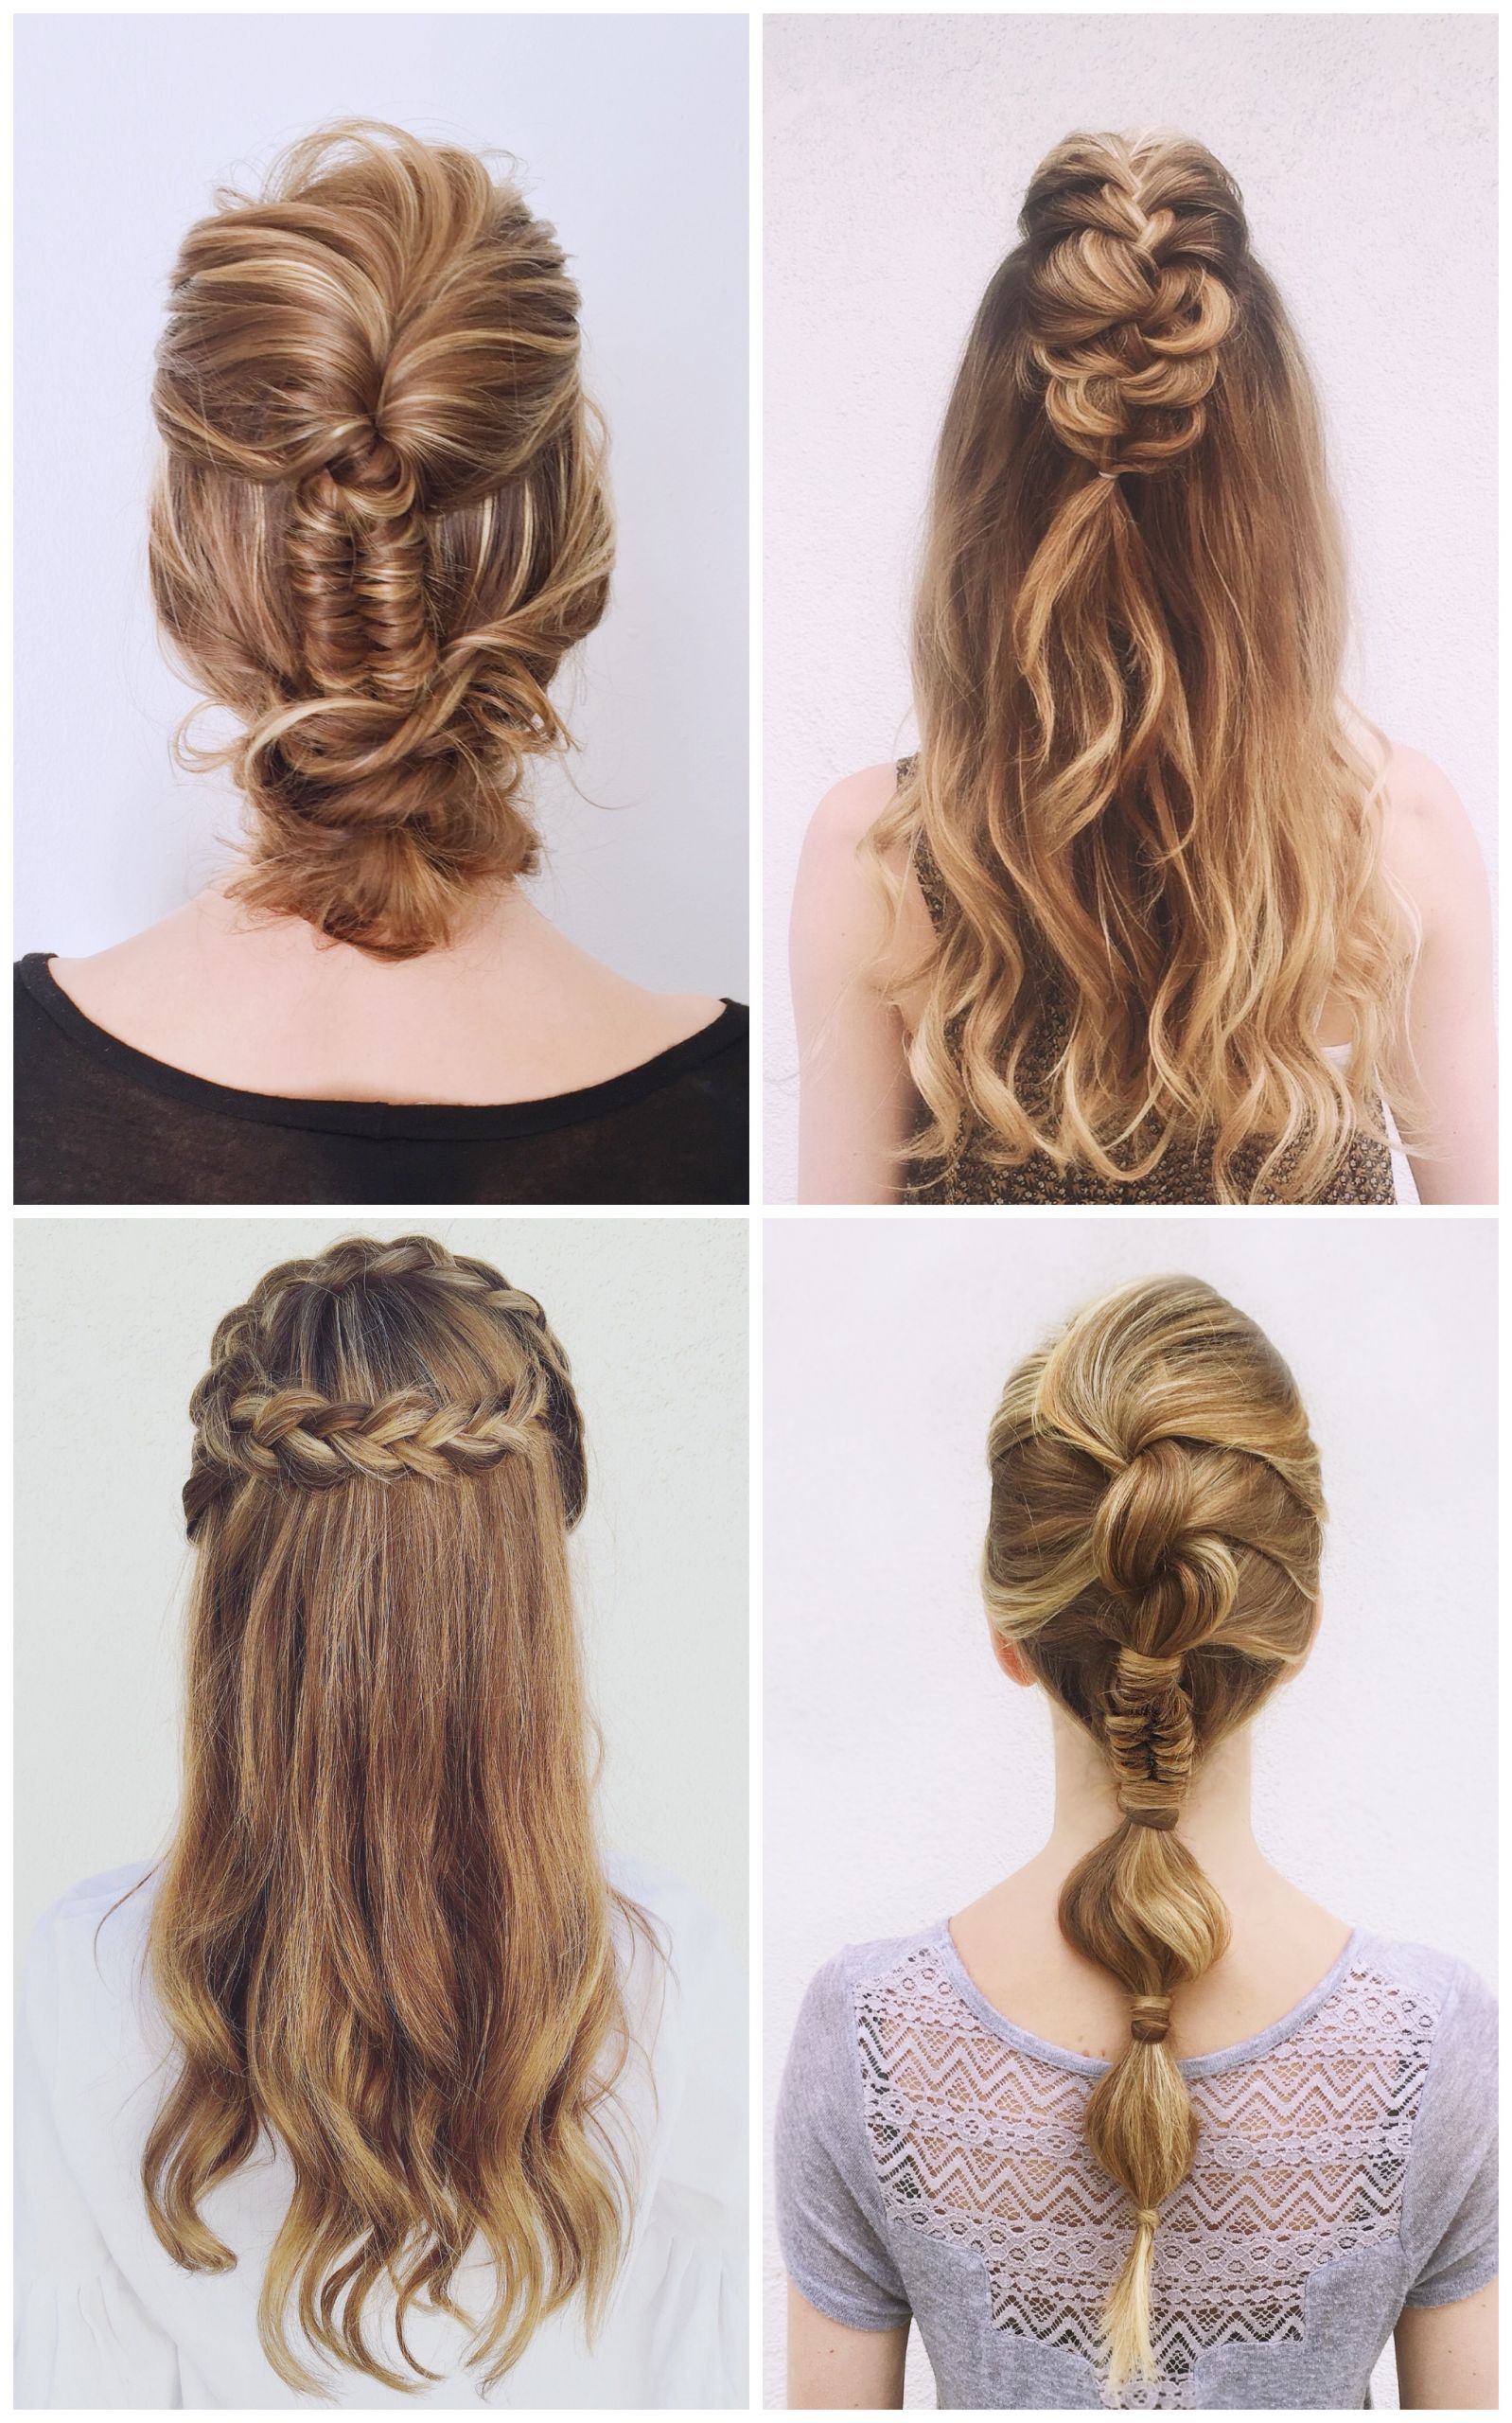 Braids Hairstyles For Prom
 20 Cute Prom Braid Hairstyles to Try for Medium and Long Hair